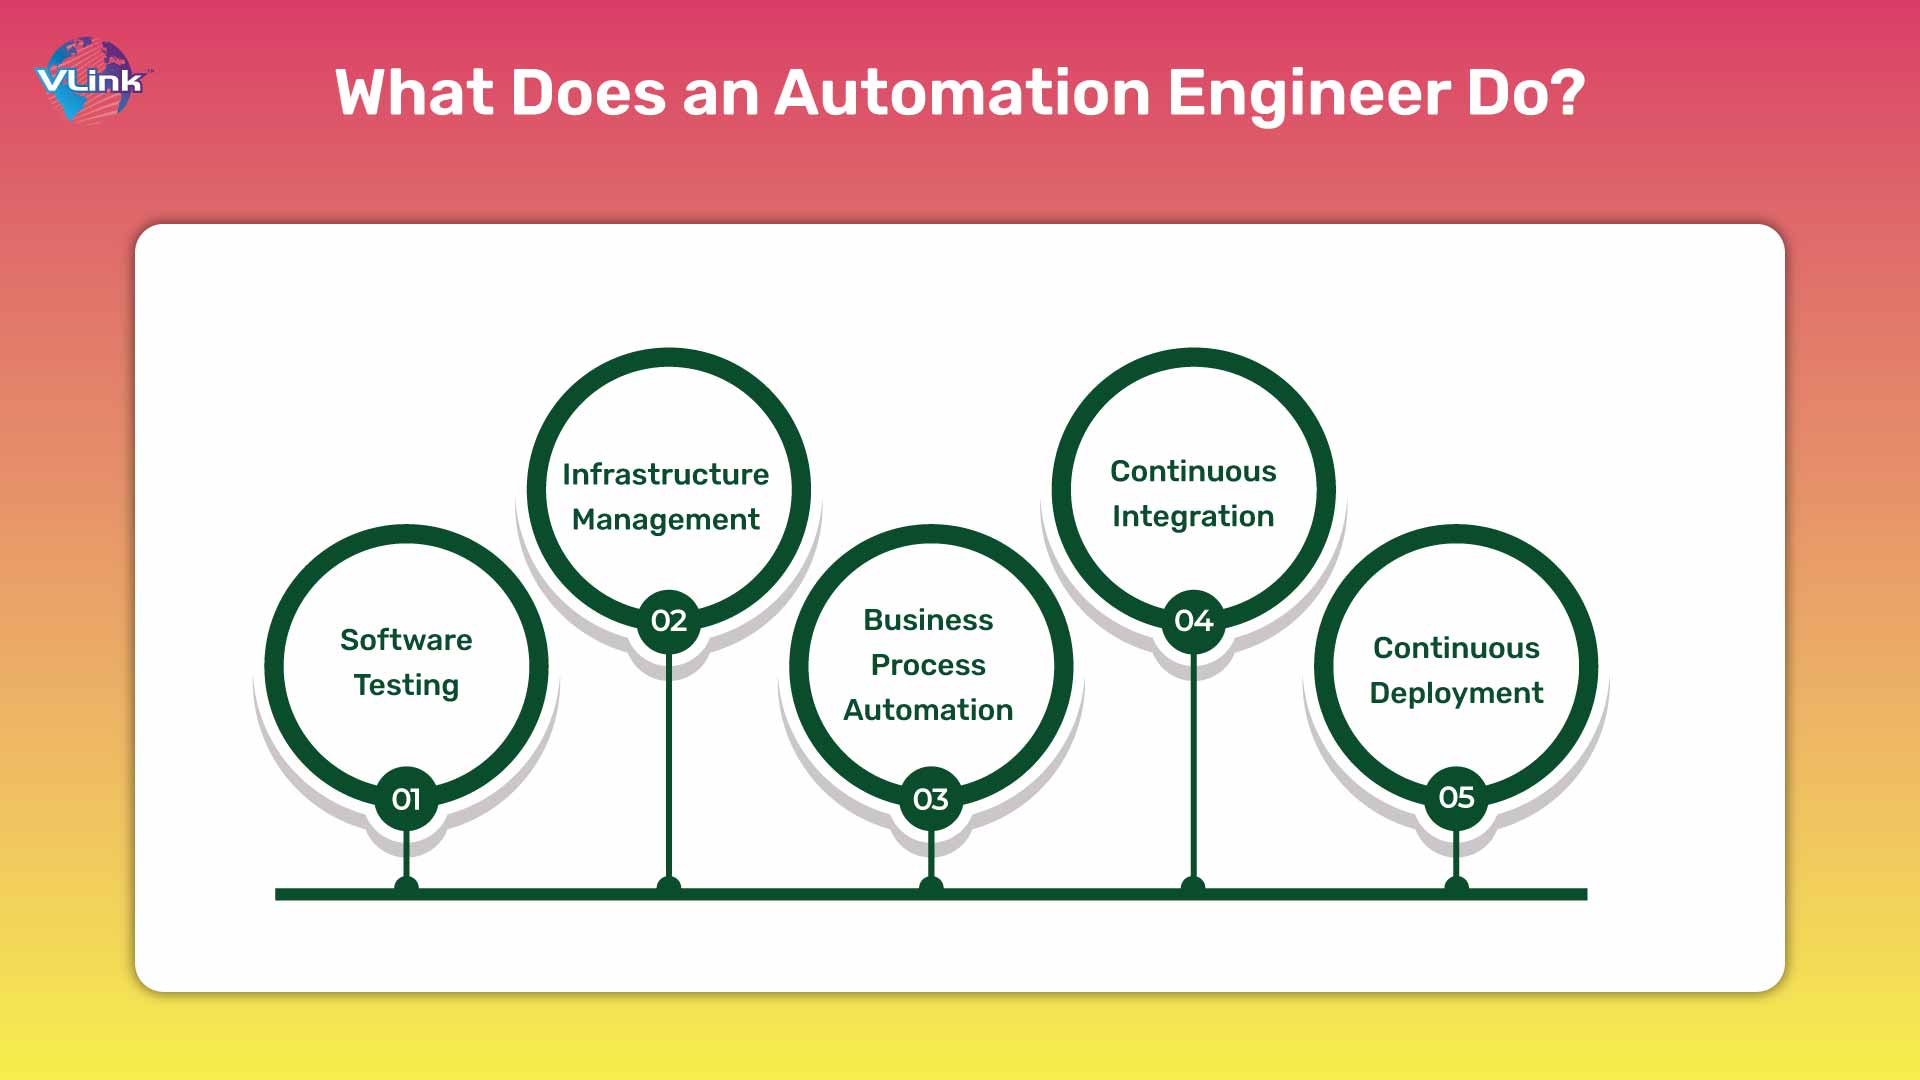 What Does an Automation Engineer Do